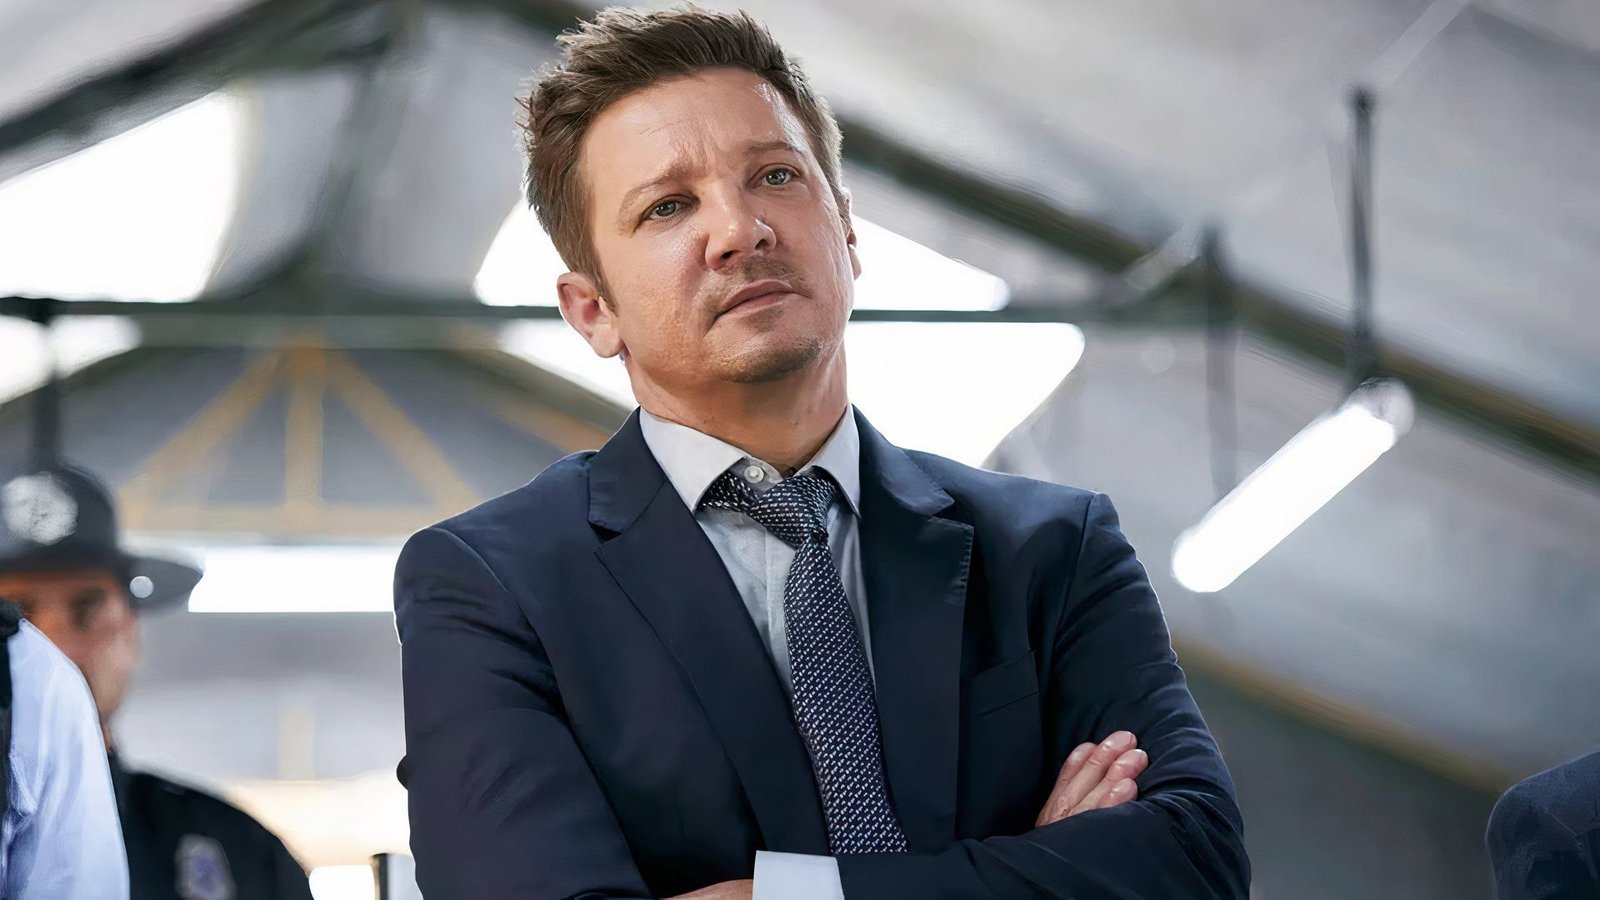 Jeremy Renner Reveals Filming Difficulties After Near-Fatal Accident